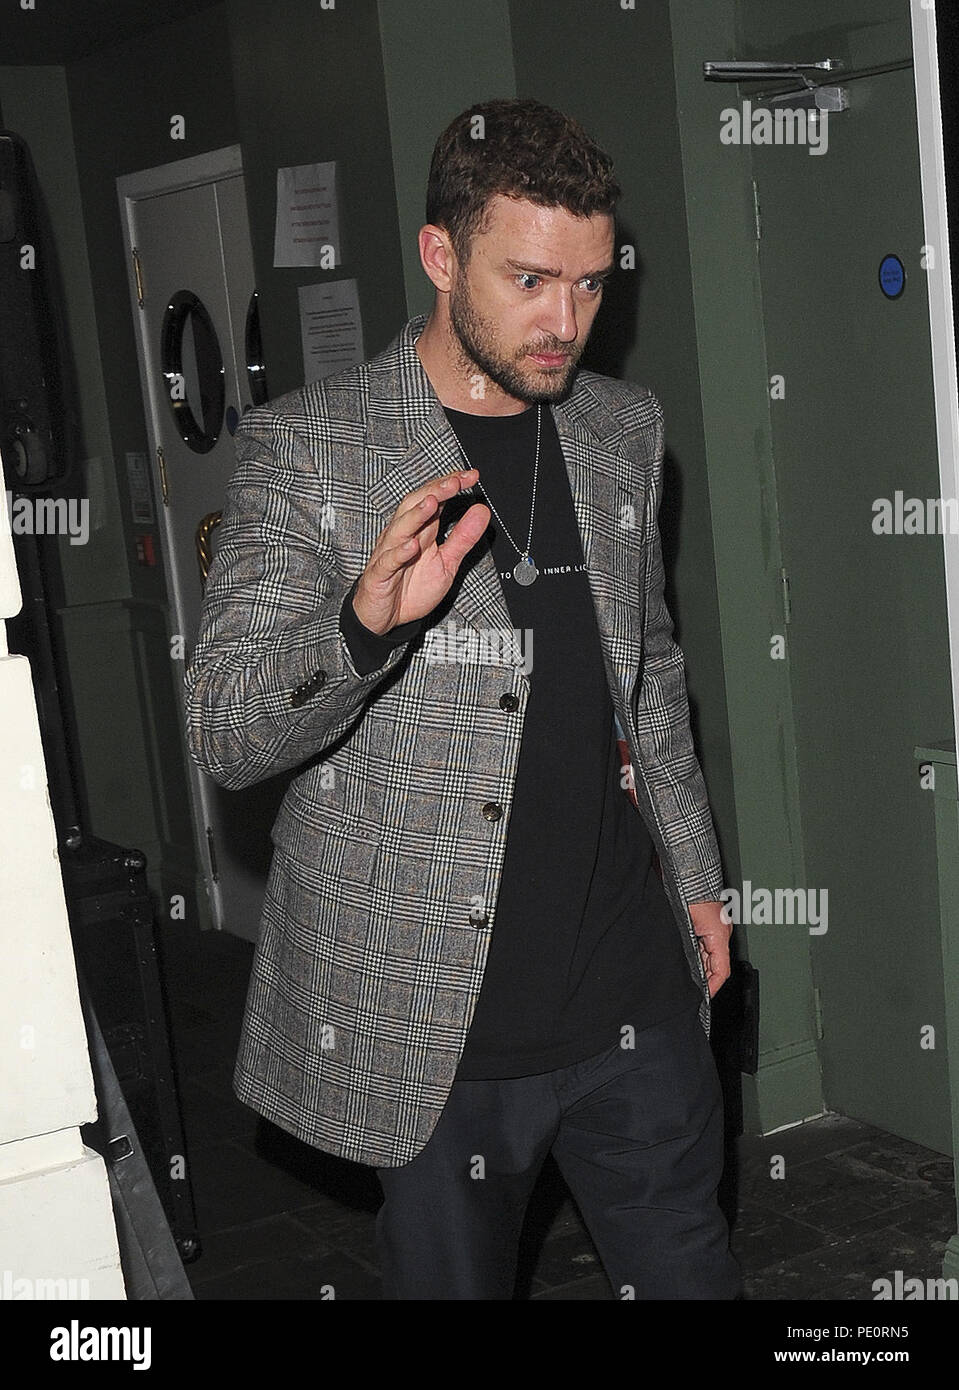 Celebrities at Annabel's in Mayfair  Featuring: Justin Timberlake Where: London, United Kingdom When: 10 Jul 2018 Credit: WENN.com Stock Photo